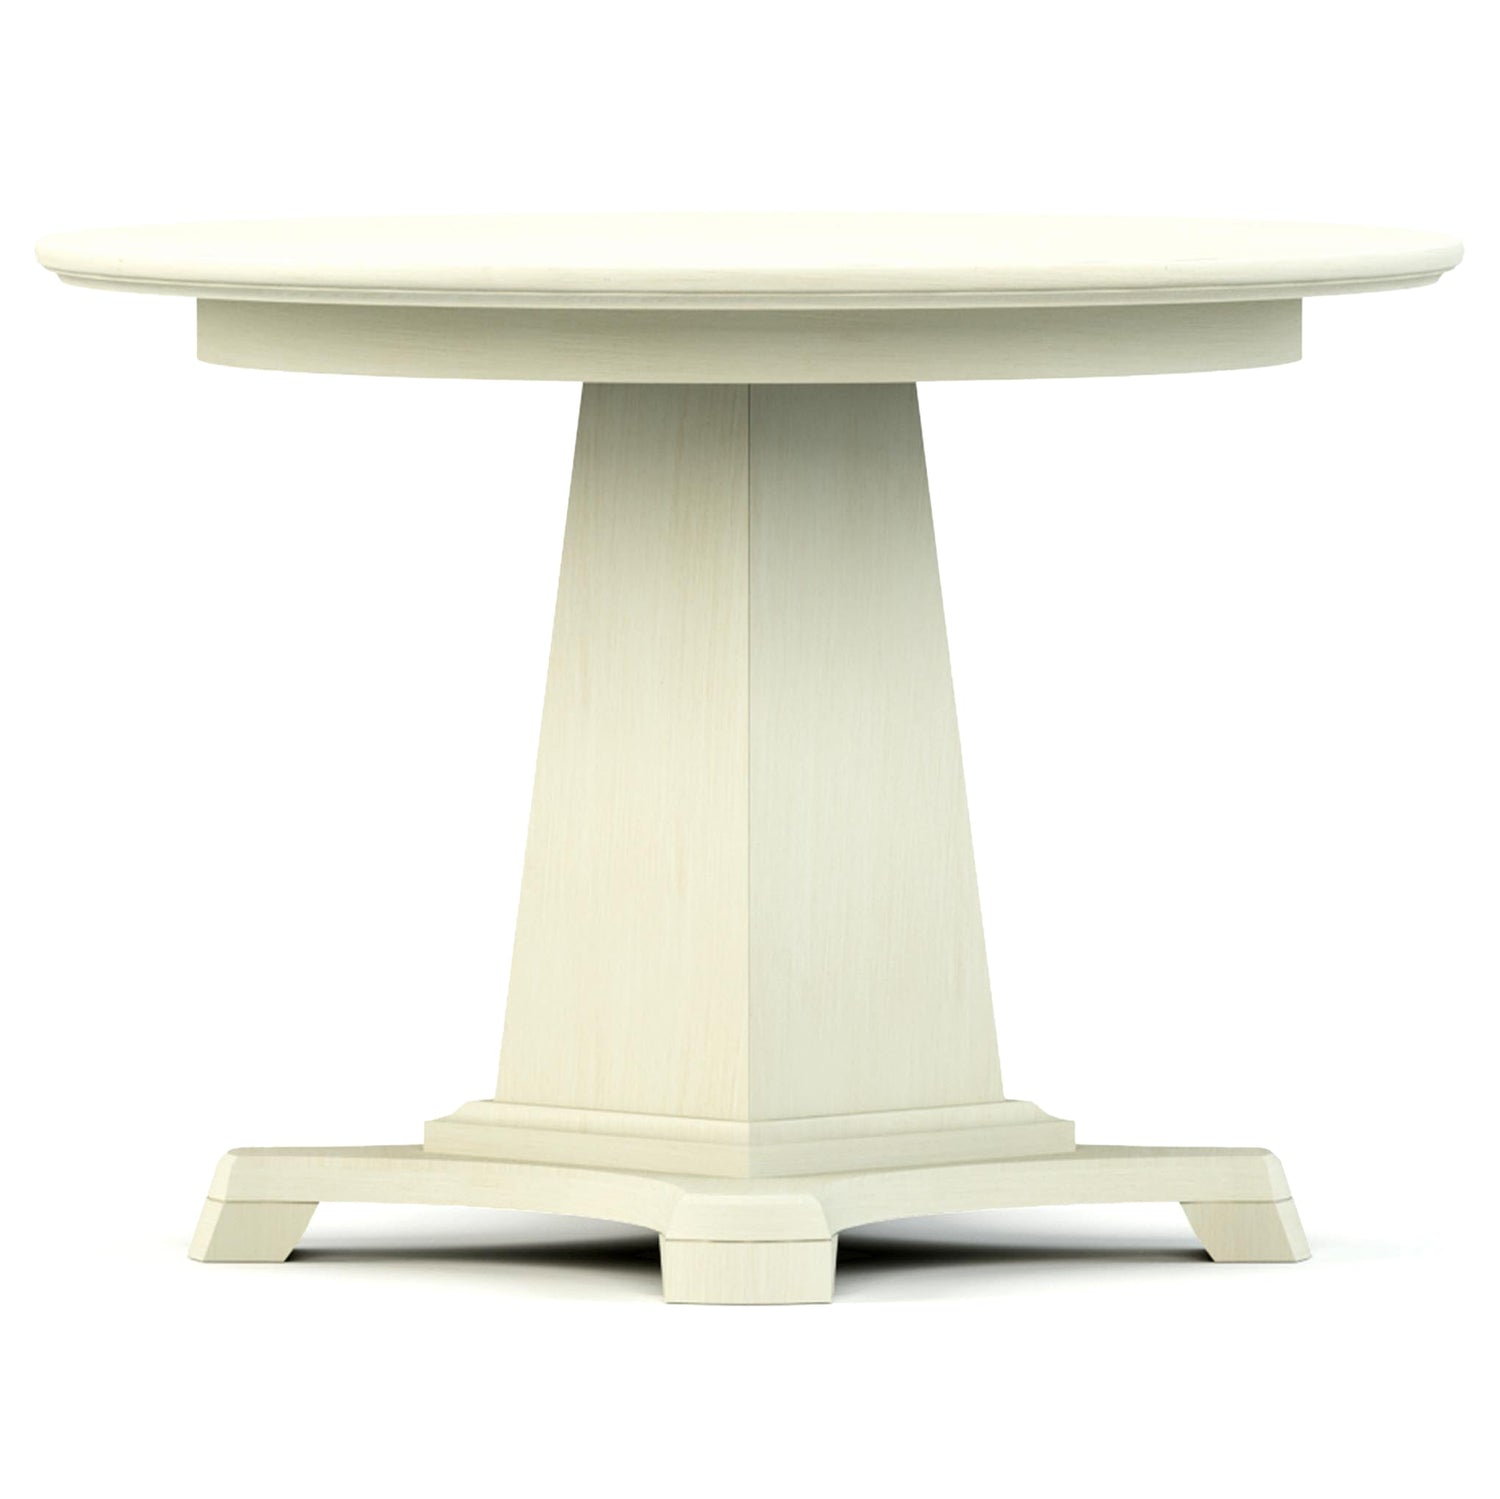 Revere 42-inch Round Dining Table